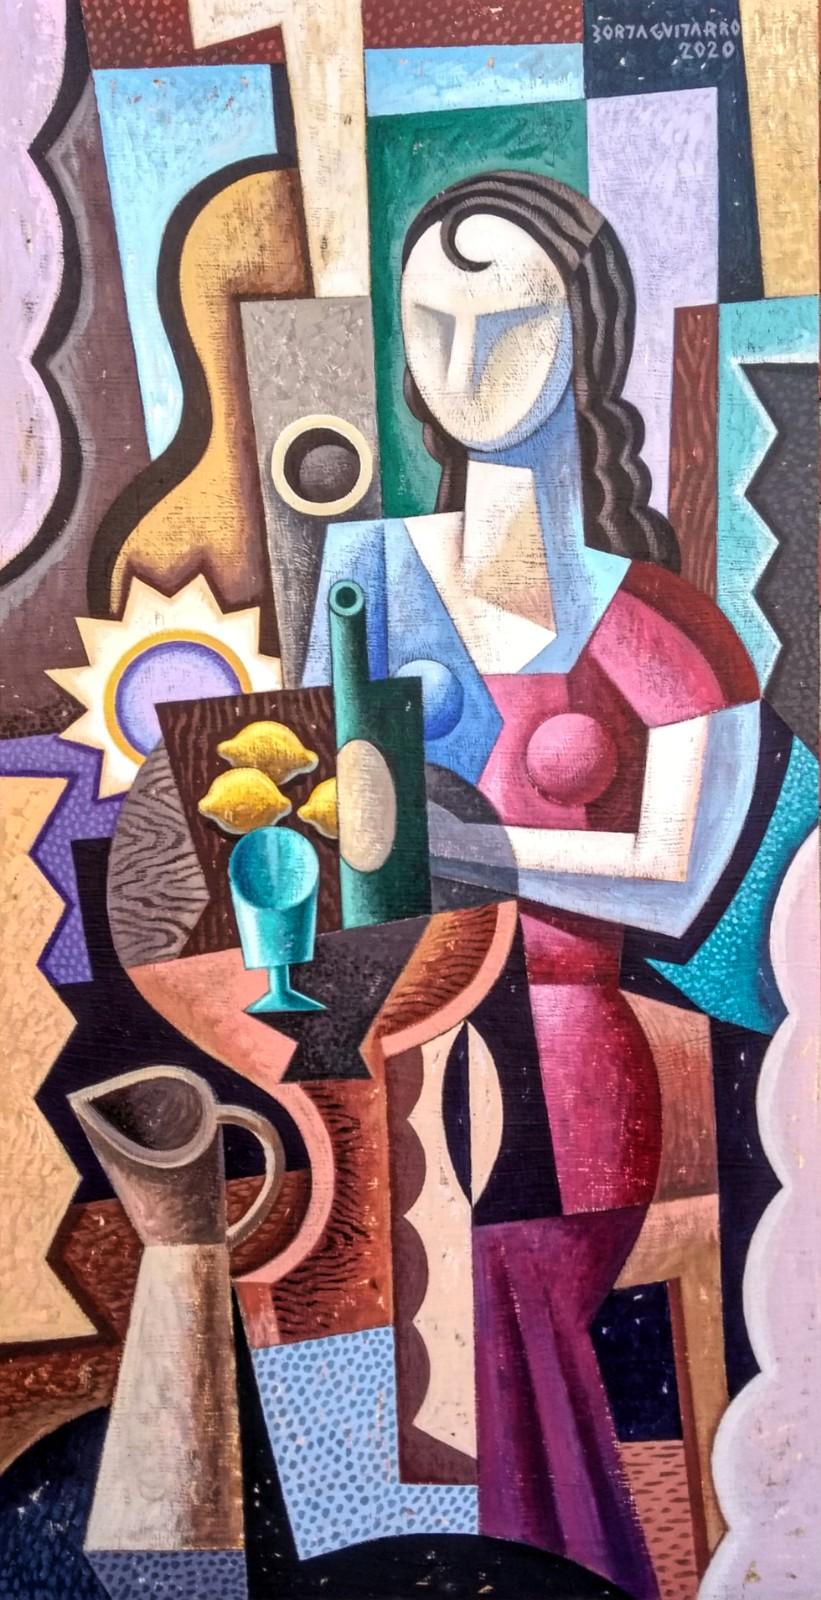 Borja Guijarro Abstract Painting - Mujer con Jarra - human female form abstract cubism figurative modern artwork